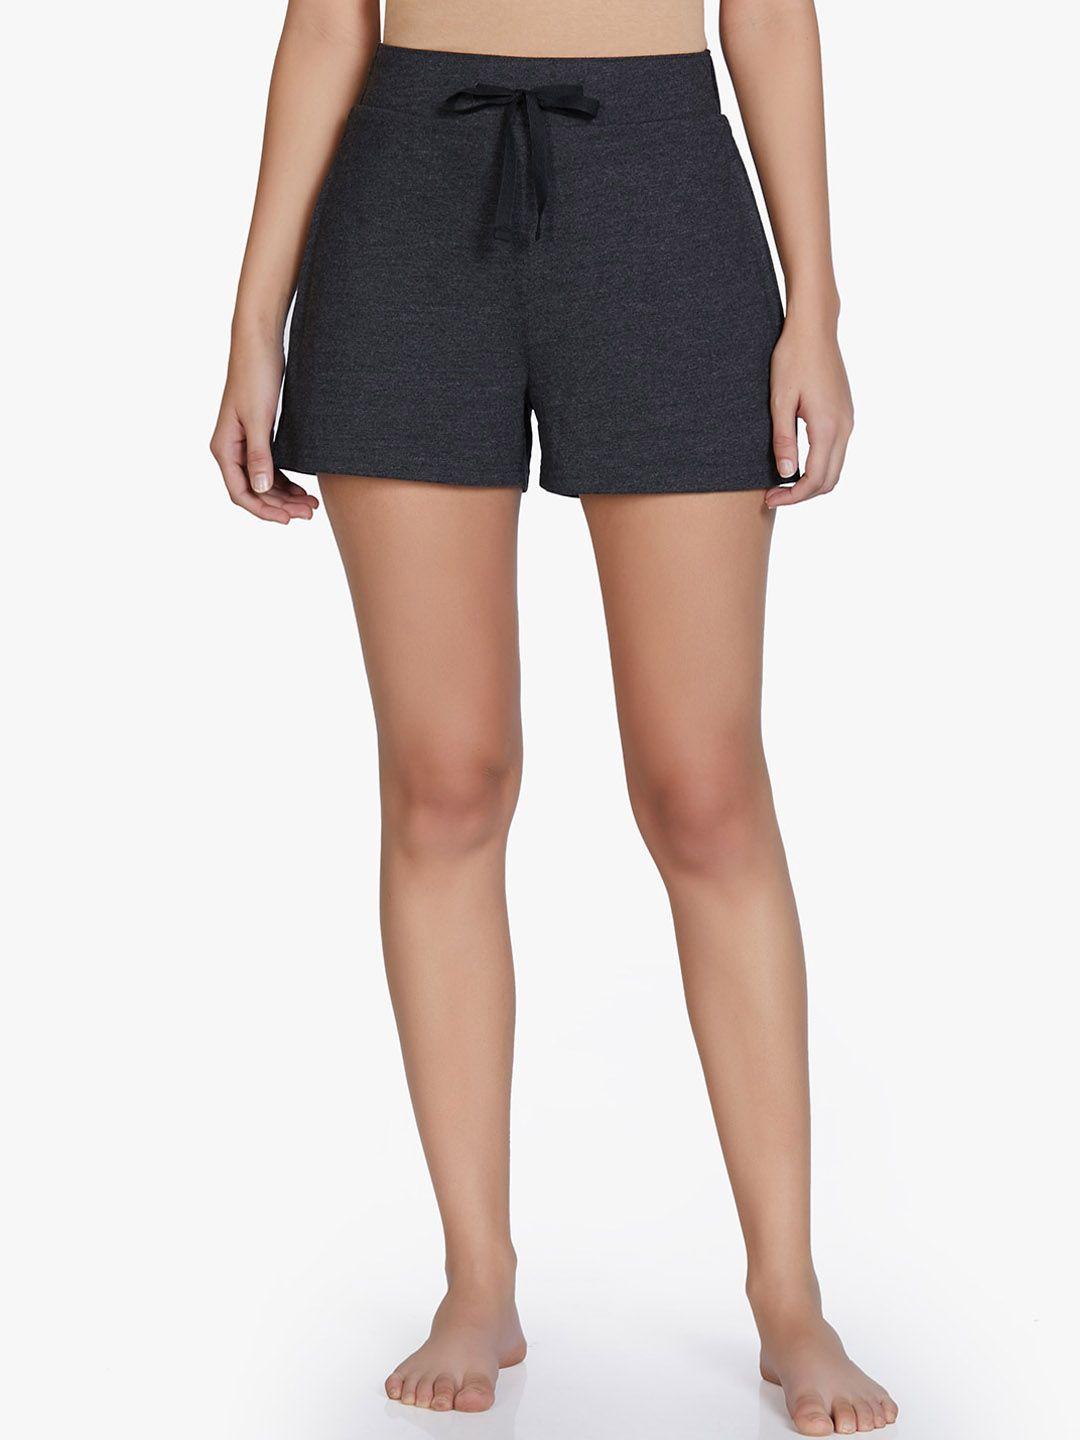 amante-women-charcoal-grey-solid-lounge-shorts